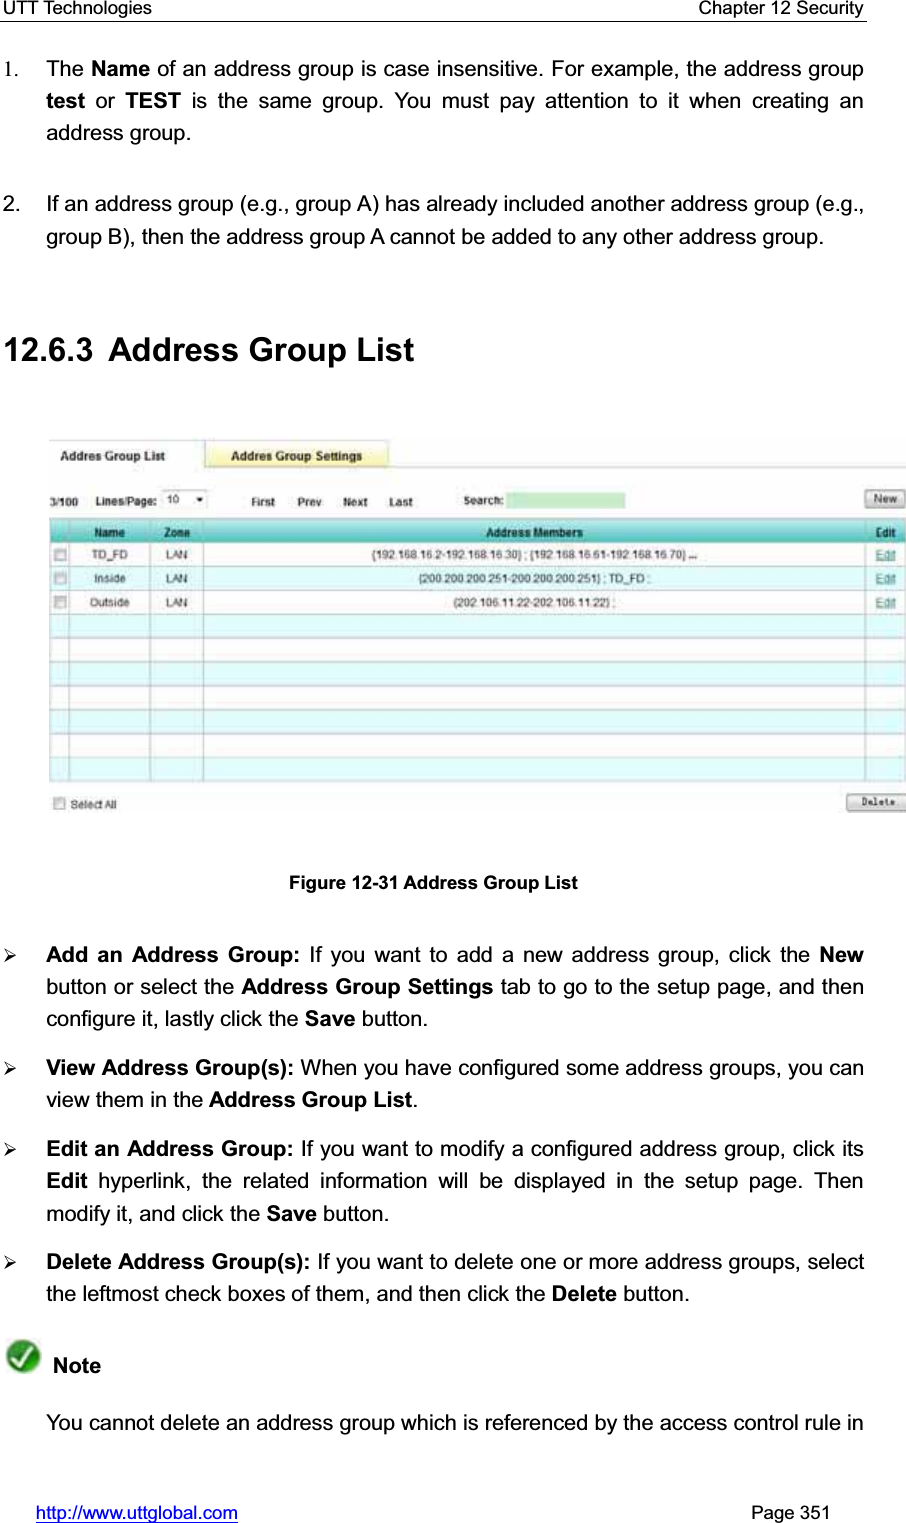 UTT Technologies    Chapter 12 Security   http://www.uttglobal.com                                                       Page 351 1. The Name of an address group is case insensitive. For example, the address group test or TEST is the same group. You must pay attention to it when creating an address group.2.  If an address group (e.g., group A) has already included another address group (e.g., group B), then the address group A cannot be added to any other address group. 12.6.3  Address Group List Figure 12-31 Address Group List¾Add an Address Group: If you want to add a new address group, click the New button or select the Address Group Settings tab to go to the setup page, and then configure it, lastly click the Save button. ¾View Address Group(s): When you have configured some address groups, you can view them in the Address Group List.¾Edit an Address Group: If you want to modify a configured address group, click itsEdit hyperlink, the related information will be displayed in the setup page. Then modify it, and click the Save button.¾Delete Address Group(s): If you want to delete one or more address groups, select the leftmost check boxes of them, and then click the Delete button.  NoteYou cannot delete an address group which is referenced by the access control rule in 